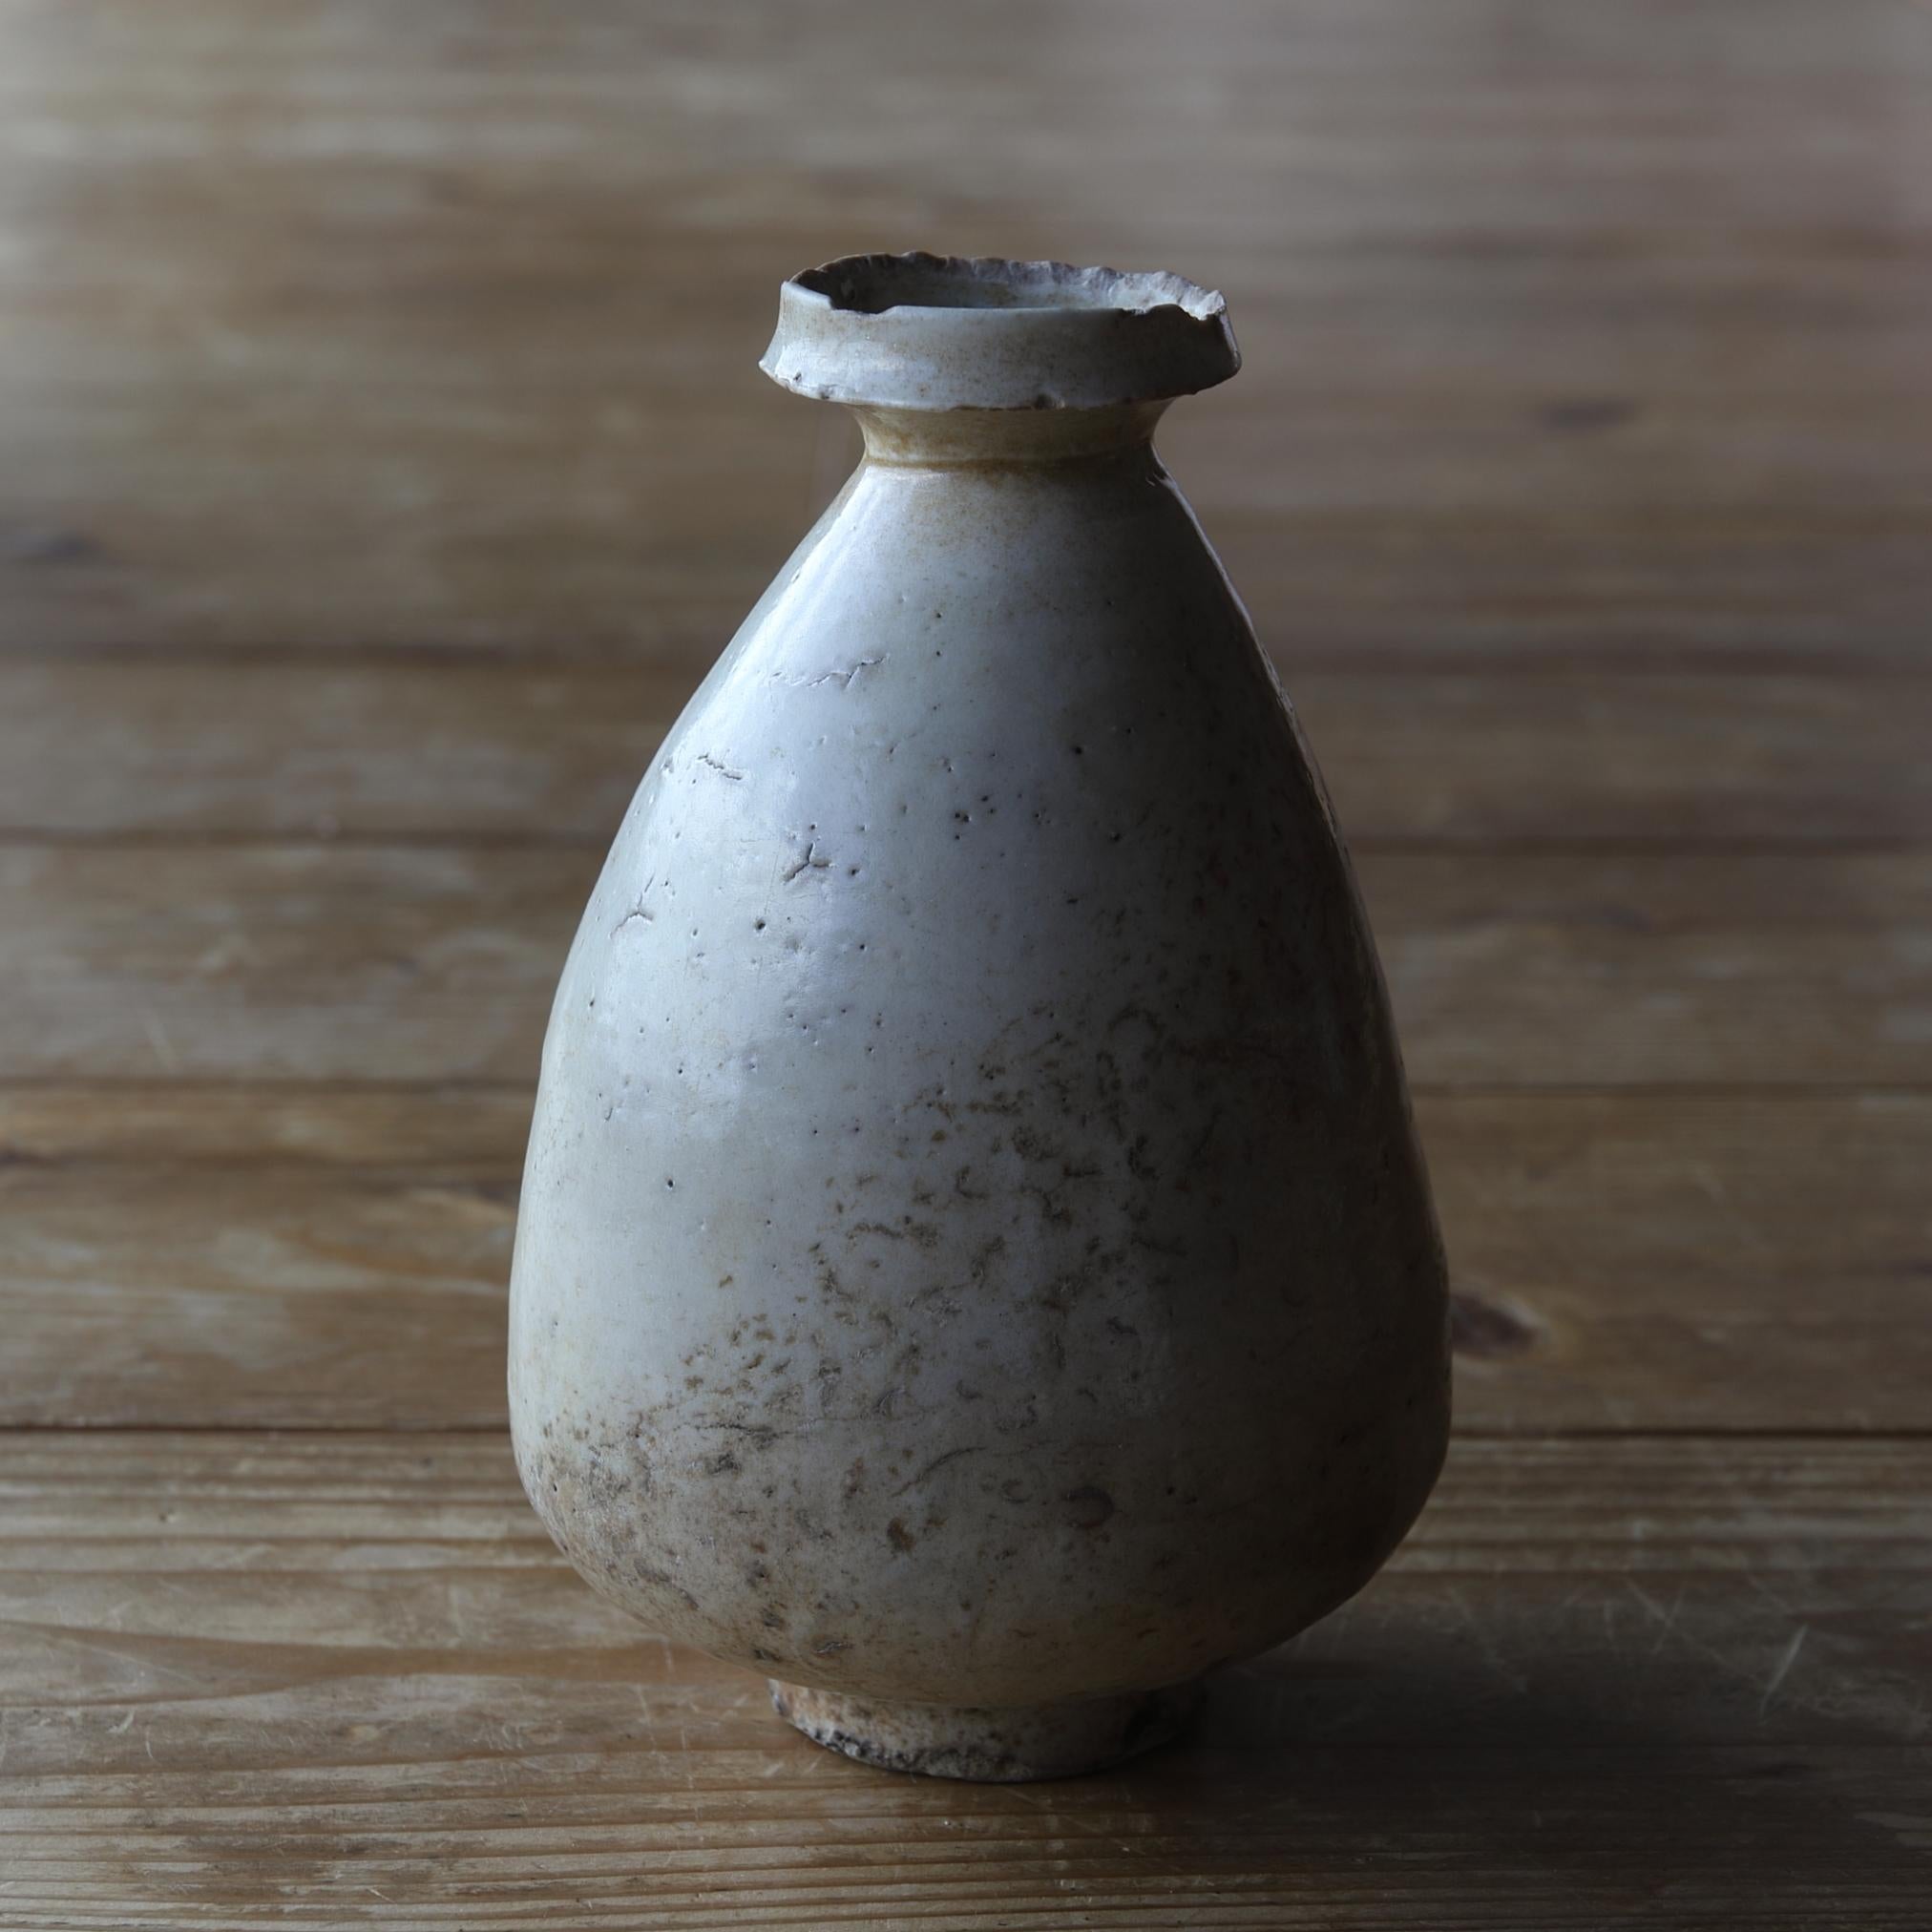 This product is a white porcelain bottle from the Joseon Dynasty. People in those days used bottles like this to make soap from waste oil.

With use, the porcelain frayed and curled up again, and the worm-eaten mouth and the oil-stained scenery